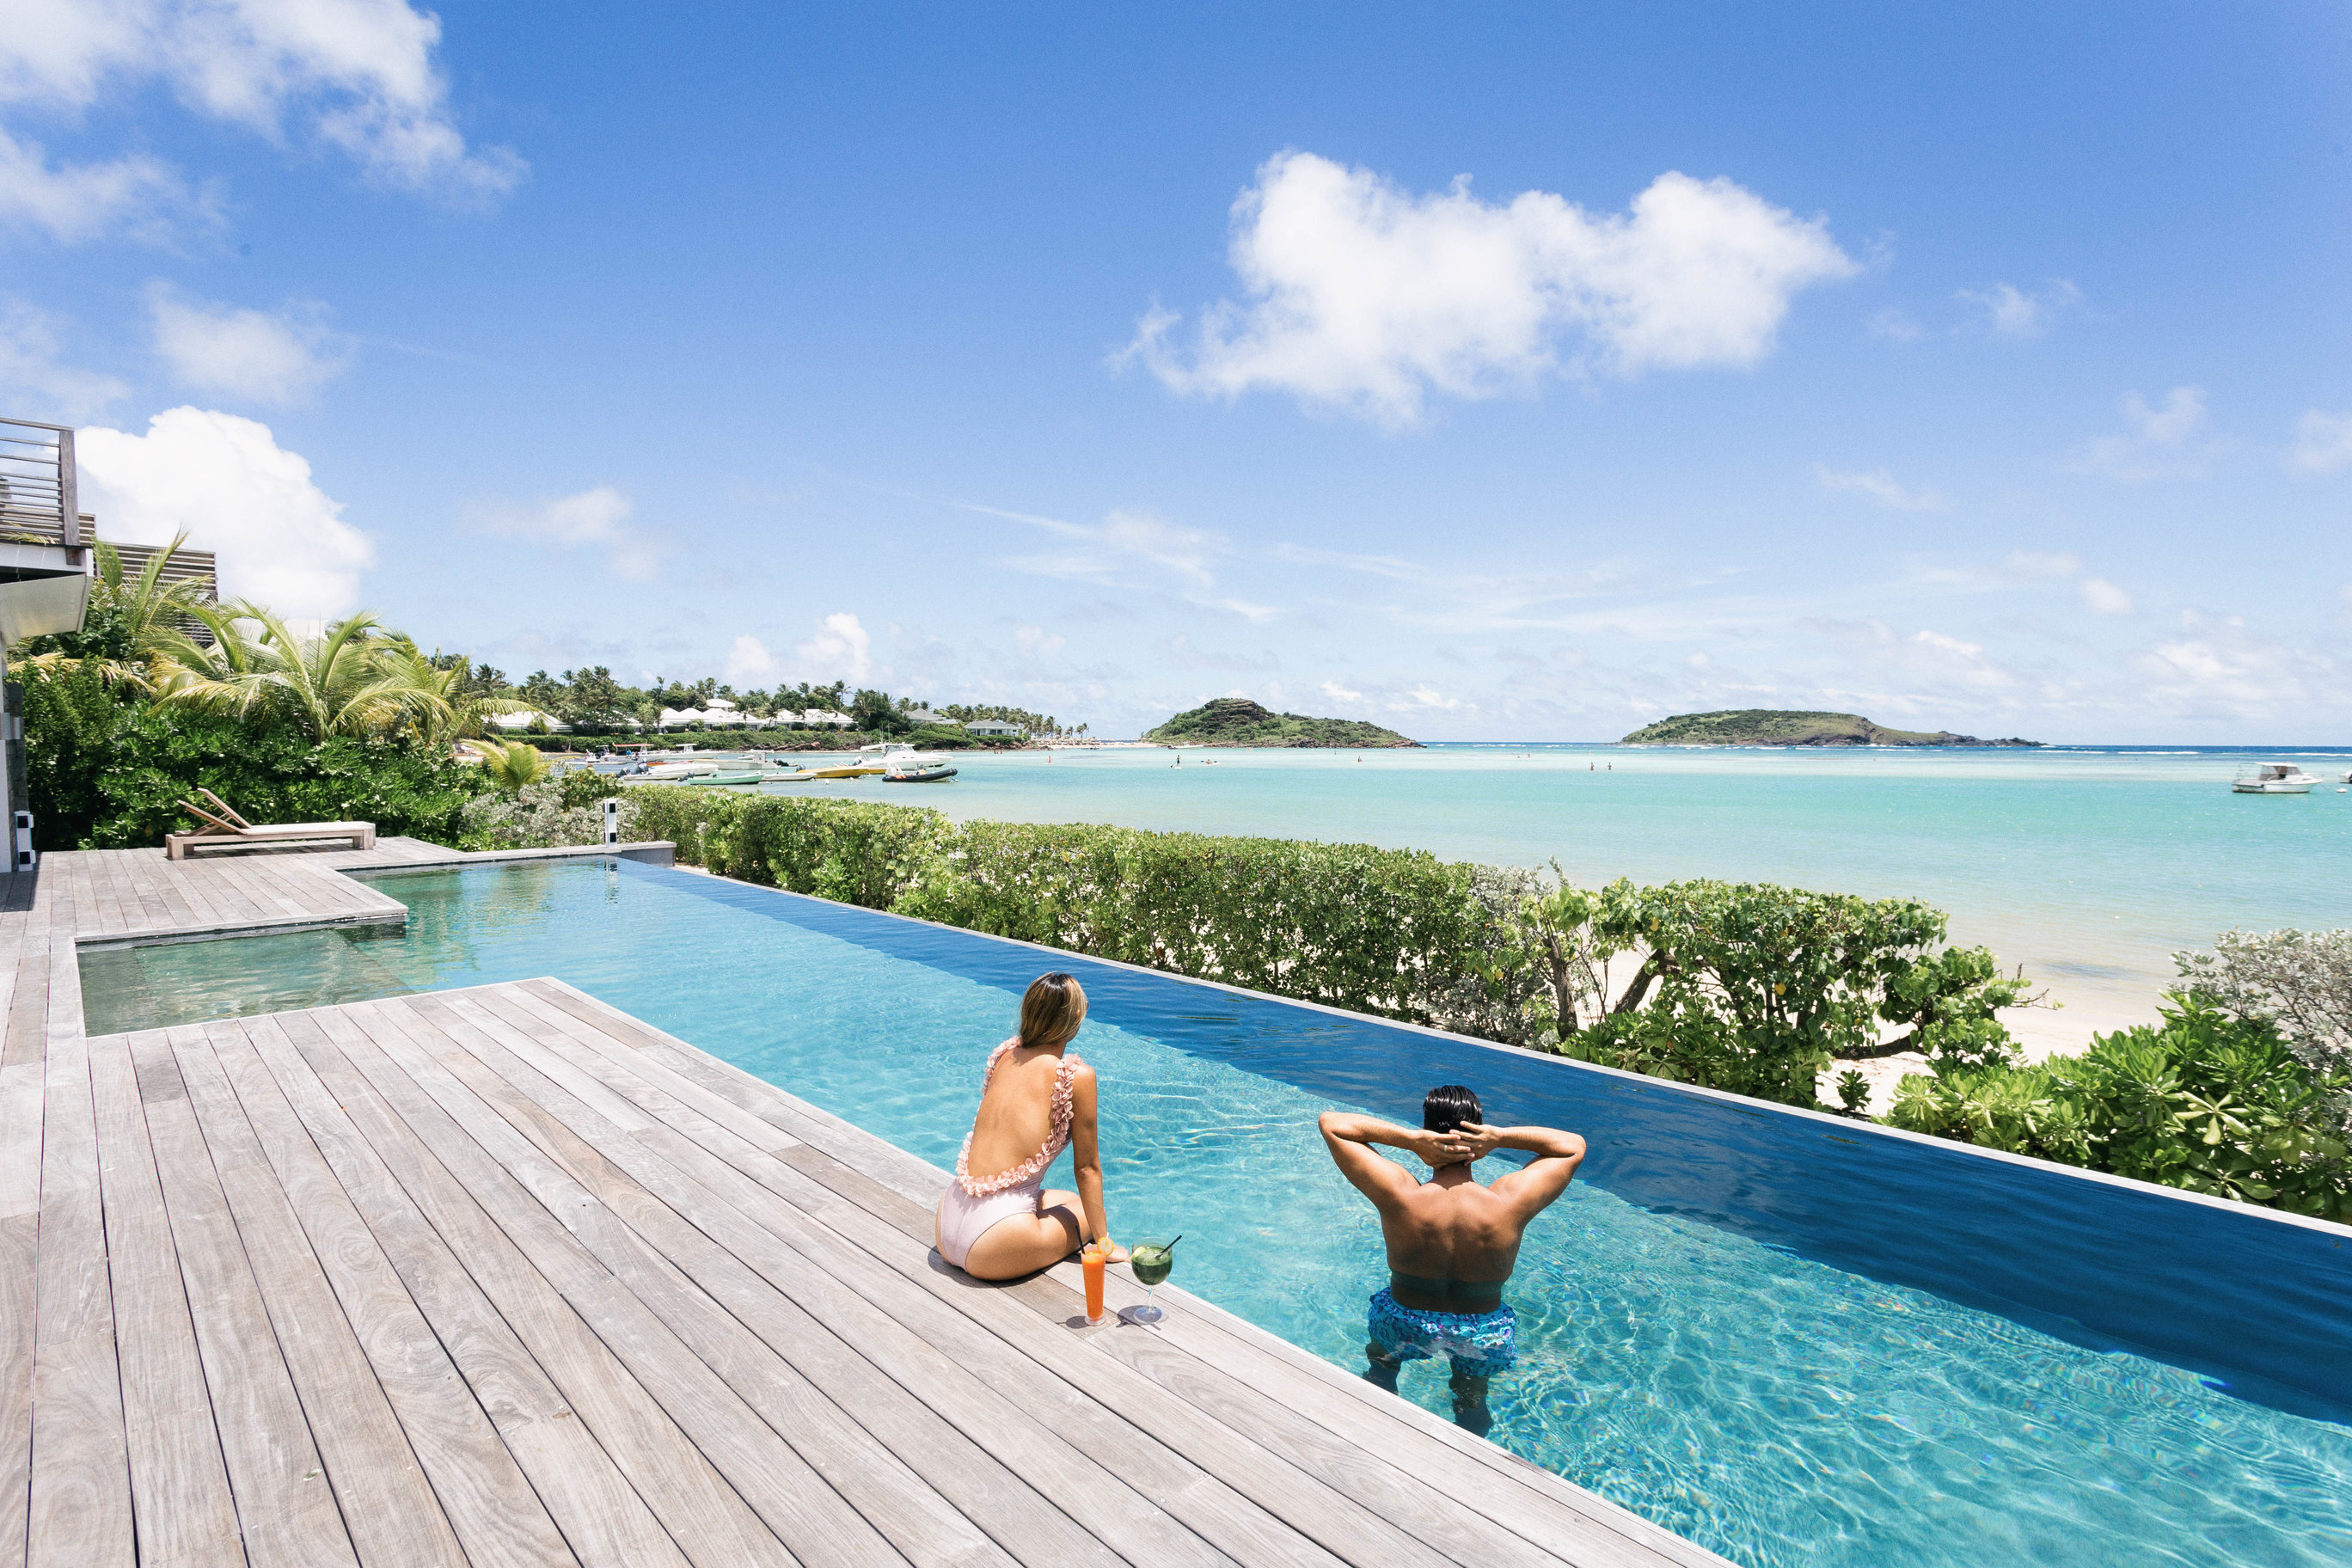 Le Barthelemy Hotel & Spa: Inside the reopening of one of the most  luxurious hotels in St. Barths